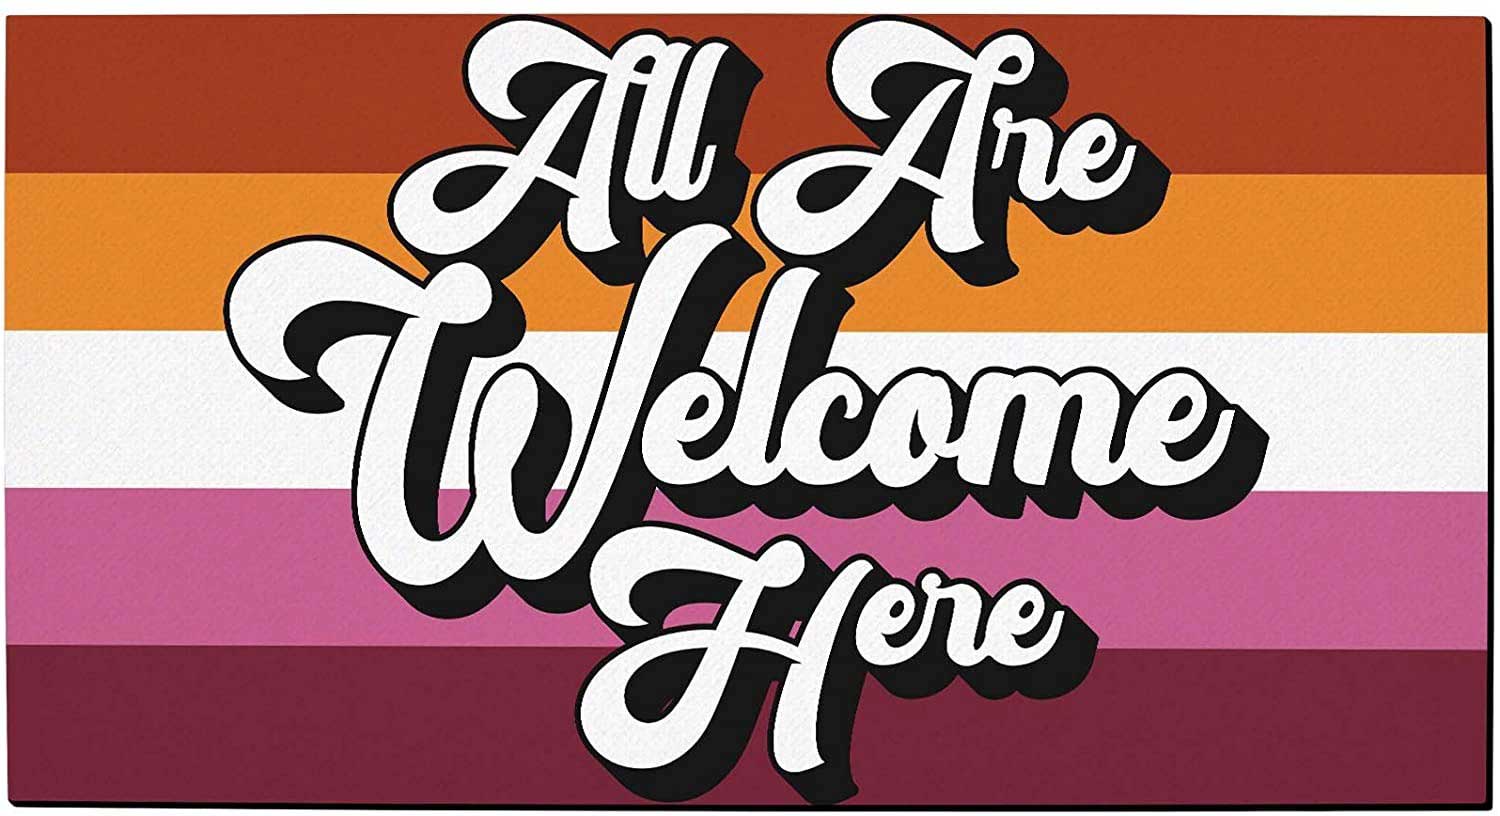 Lesbian Pride Doormat All Are Welcome Here Lesbian Gifts Decorative Doormat Lesbian